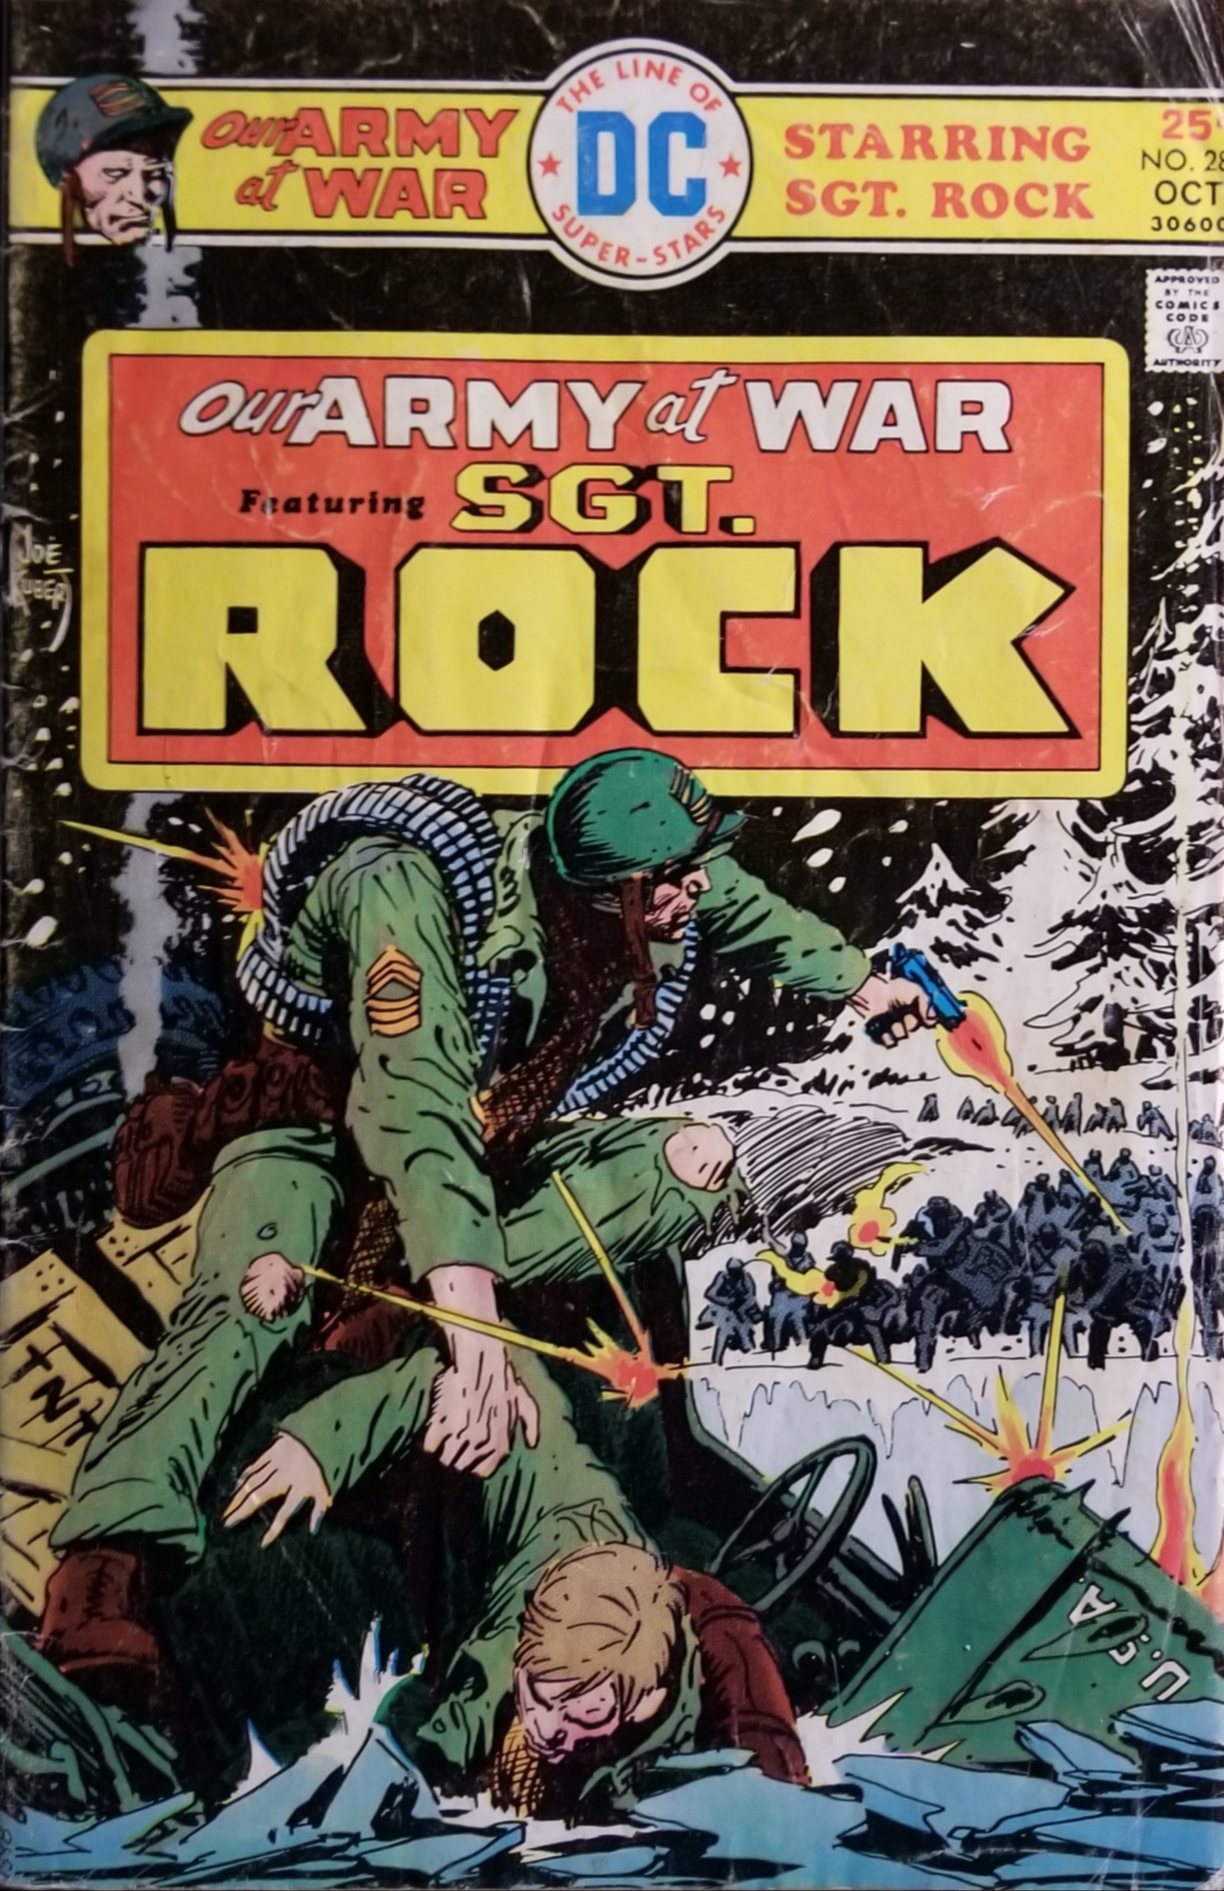 It’s an All-Star Episode with Sgt. Rock, TMNT, &amp;
Chang Fury!